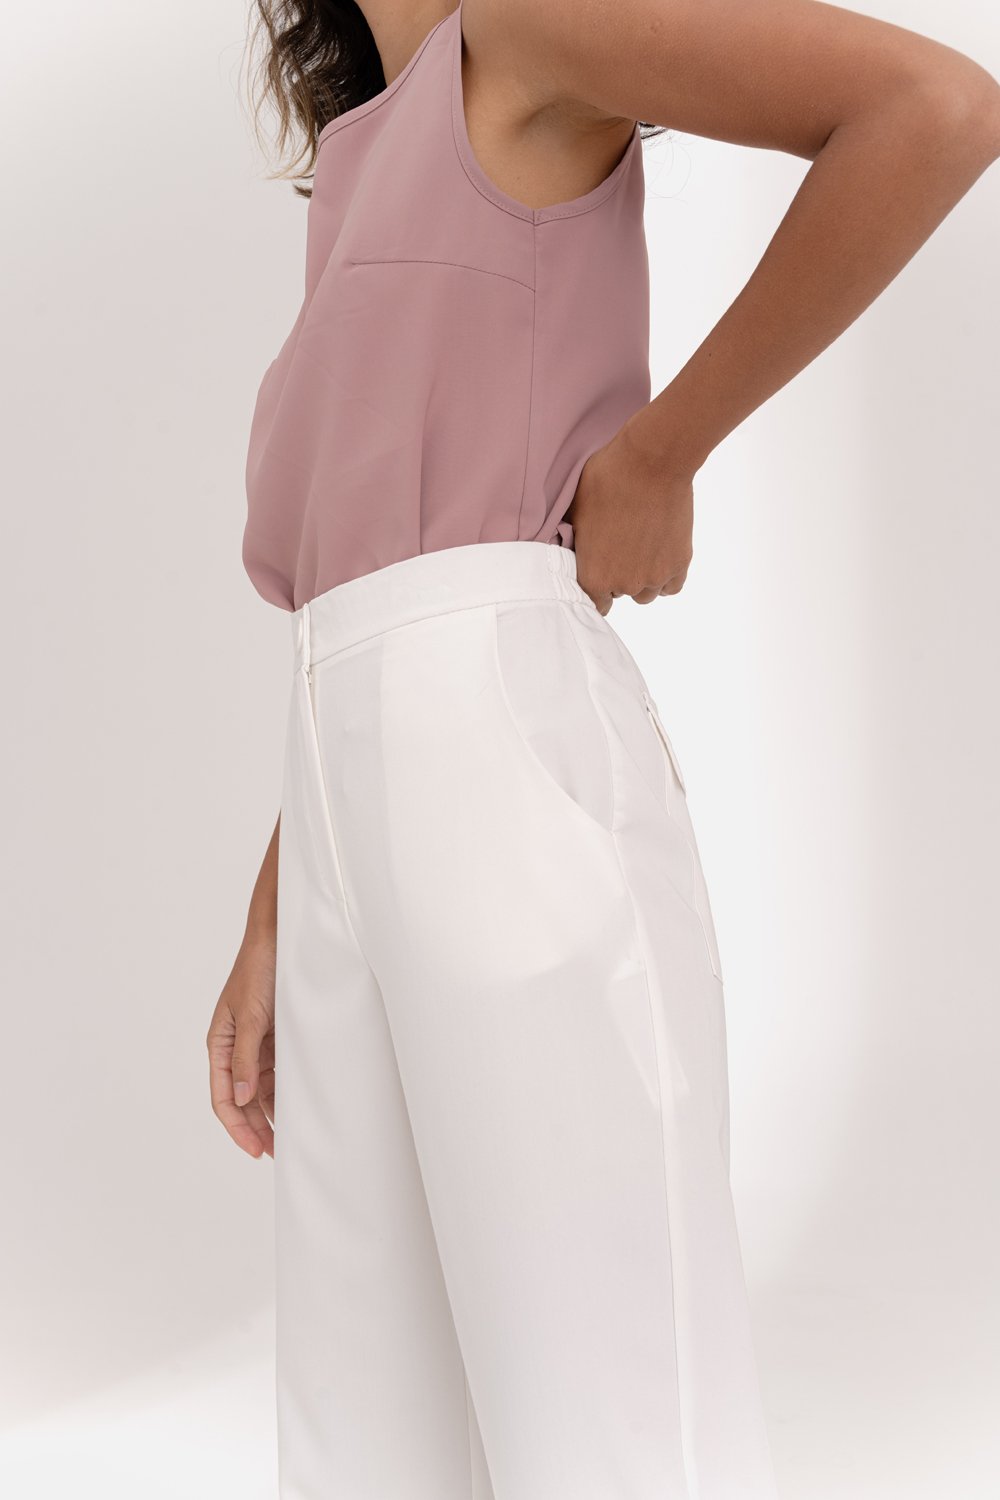 Milk trousers with an elasticated waistband and pleats at the bottom